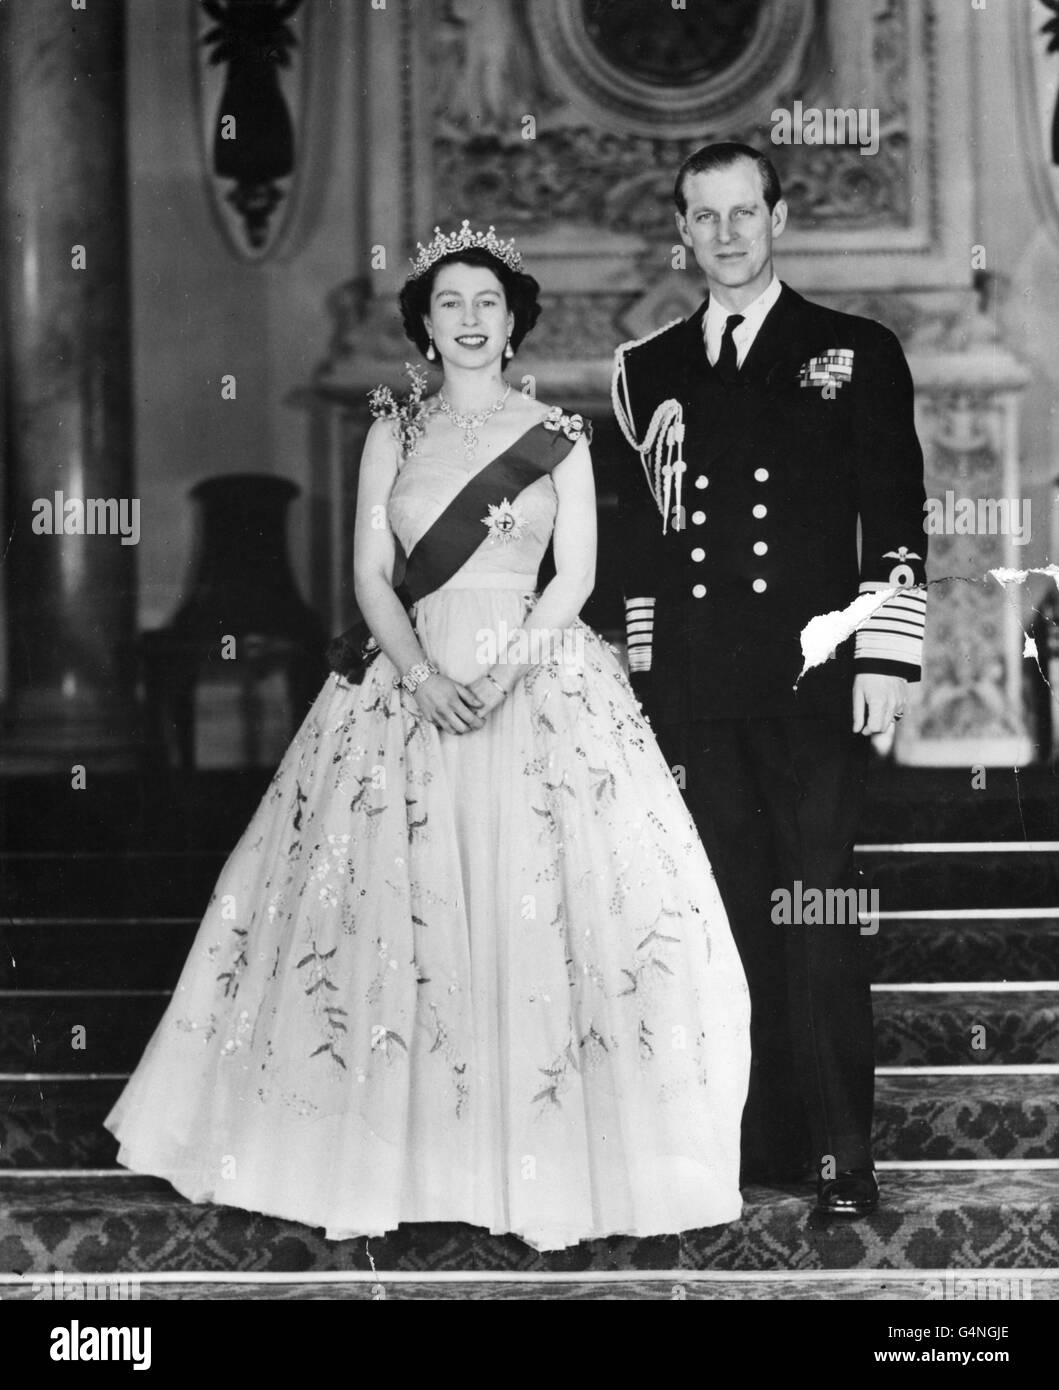 Queen Elizabeth II and the Duke of Edinburgh in the Grand Entrance at Buckingham Palace, in a Royal Command photograph, taken by Baron. The Duke is wearing the uniform of the Admiral of the Fleet Stock Photo